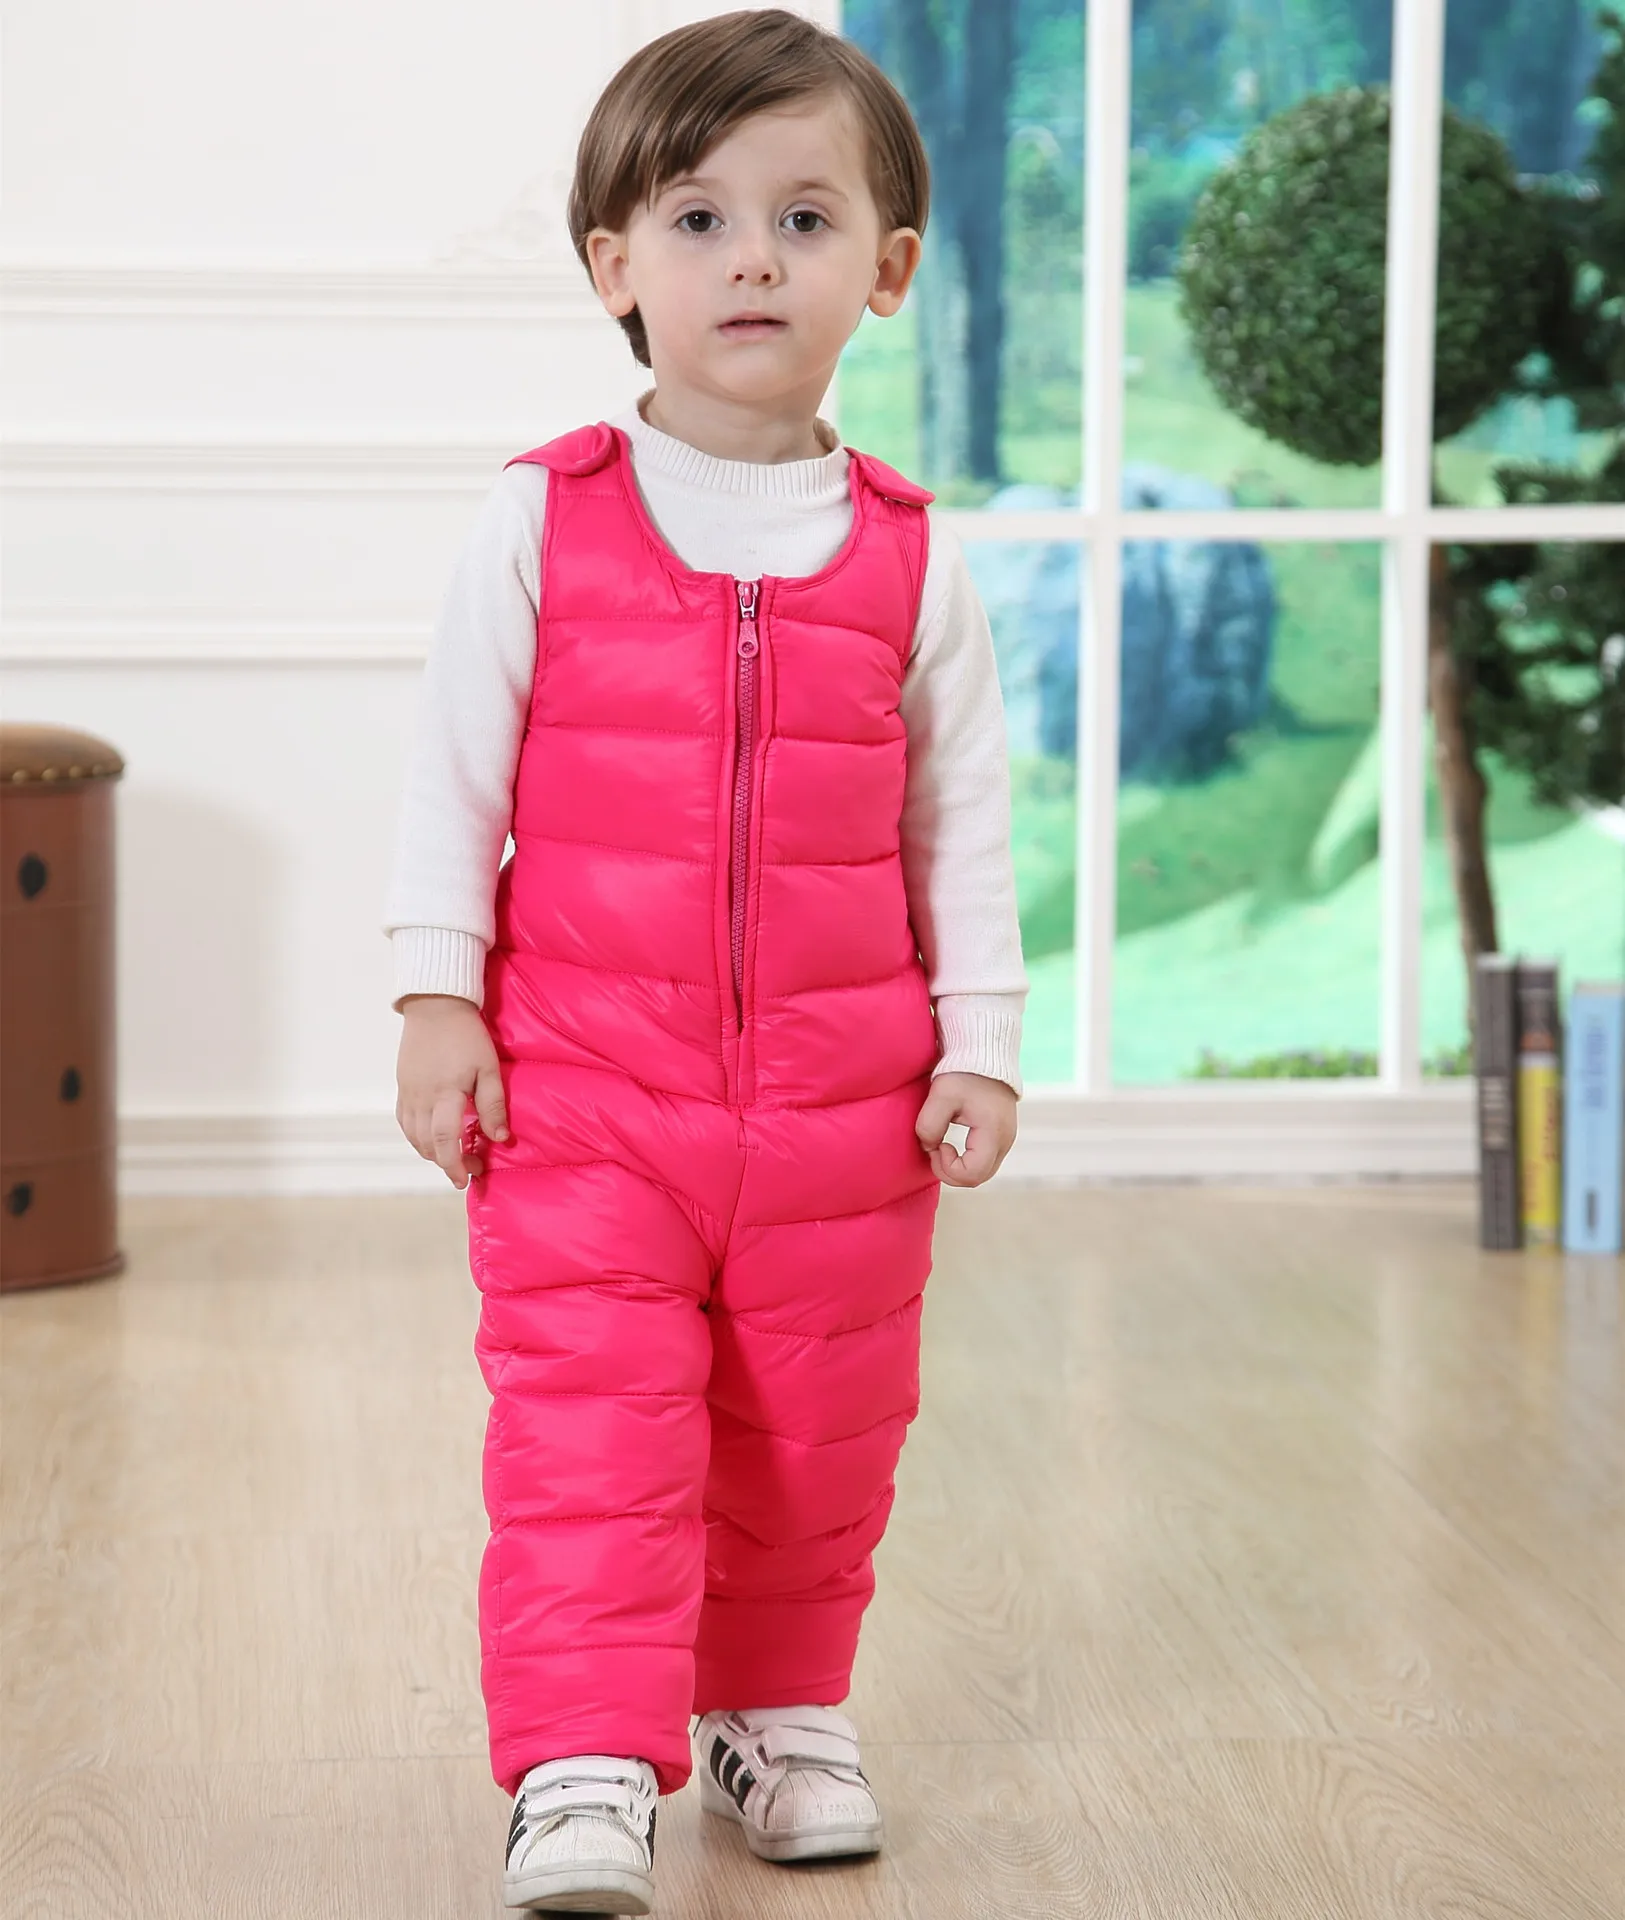 Plus Velvet Warm Children's Down Pants Boys Girls Baby Winter Outdoor Sport Thermal Padded Trousers Can Be Open Crotch Jumpsuit - Цвет: Rose Red